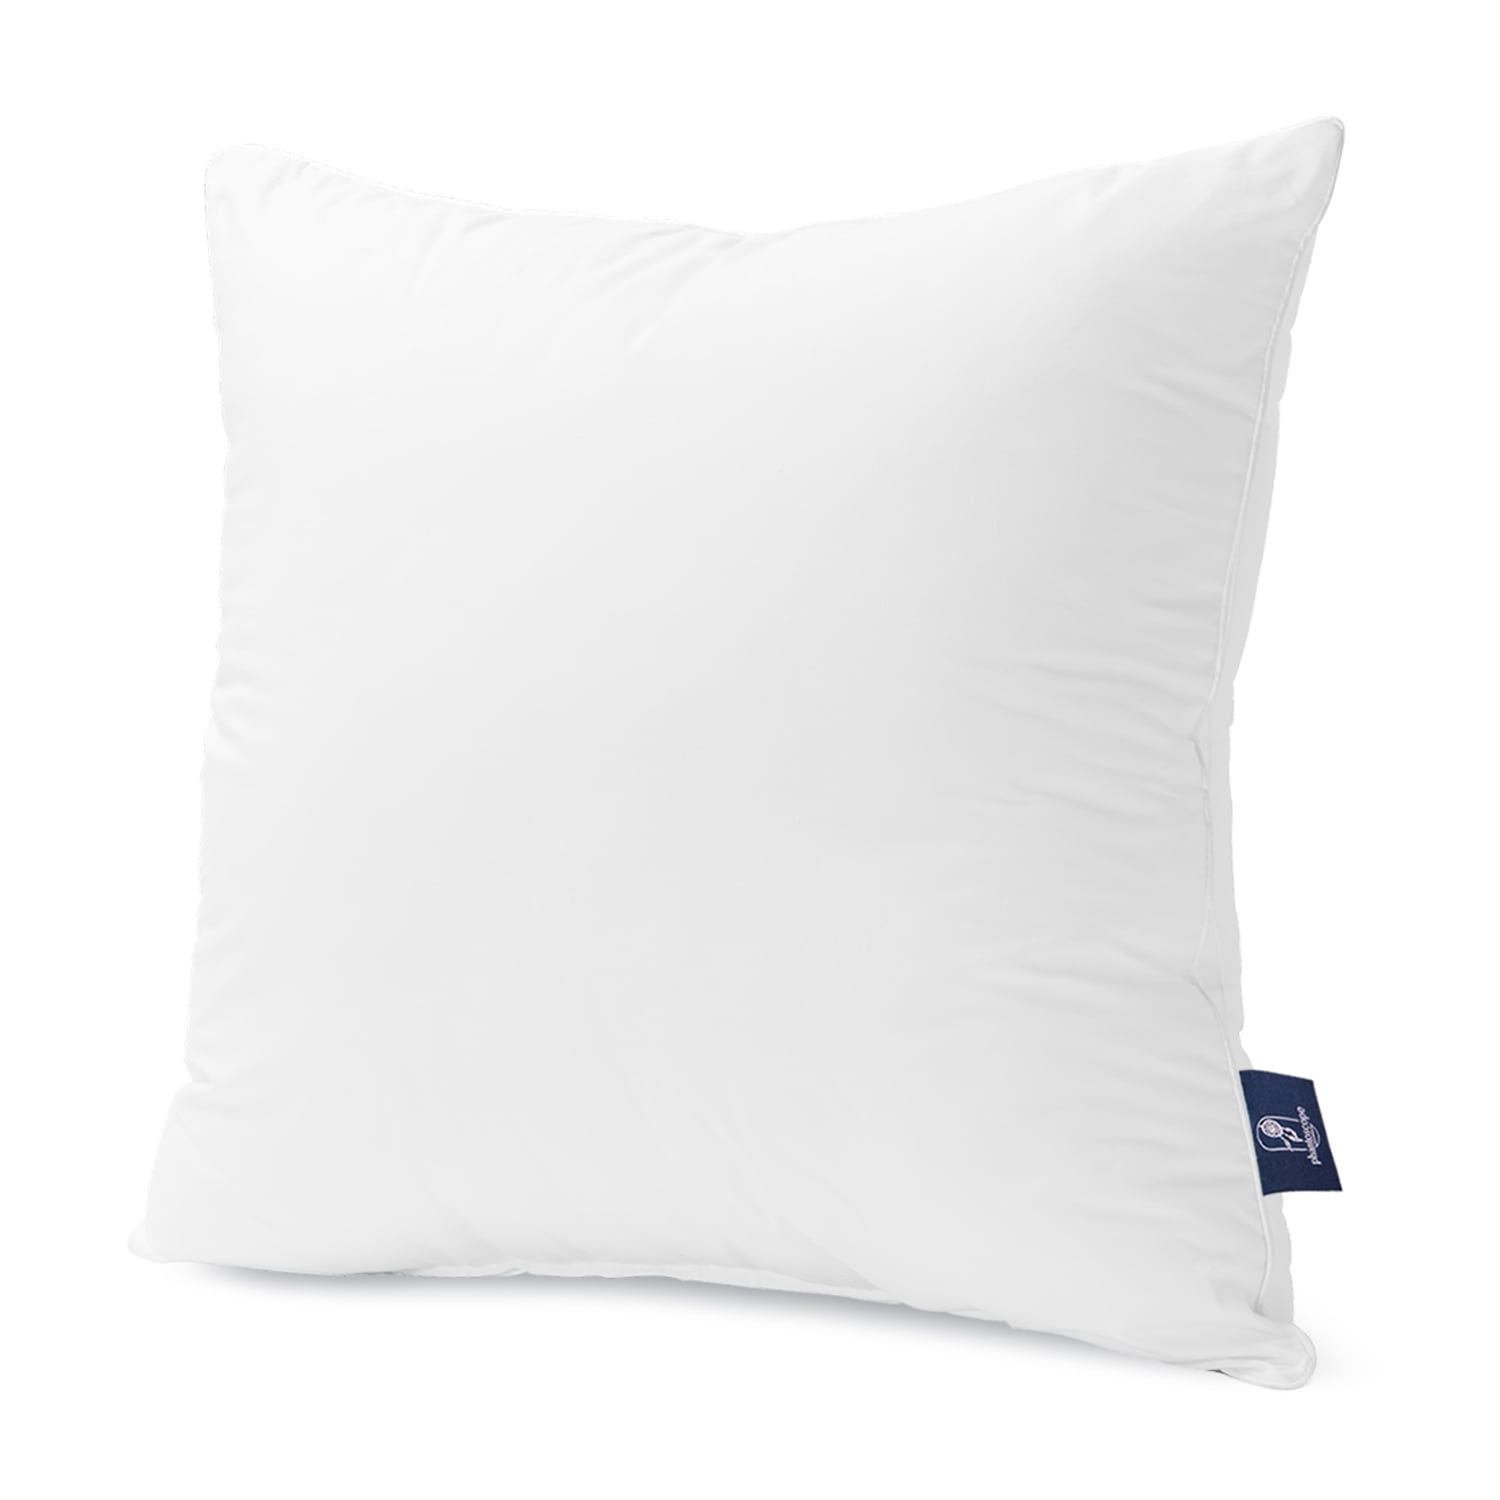 ACCENTHOME 16x16 Pillow Inserts (Pack of 4) Hypoallergenic Throw Pillows Forms | White Square Throw Pillow Insert | Decorative Sham Stuffer Cushion